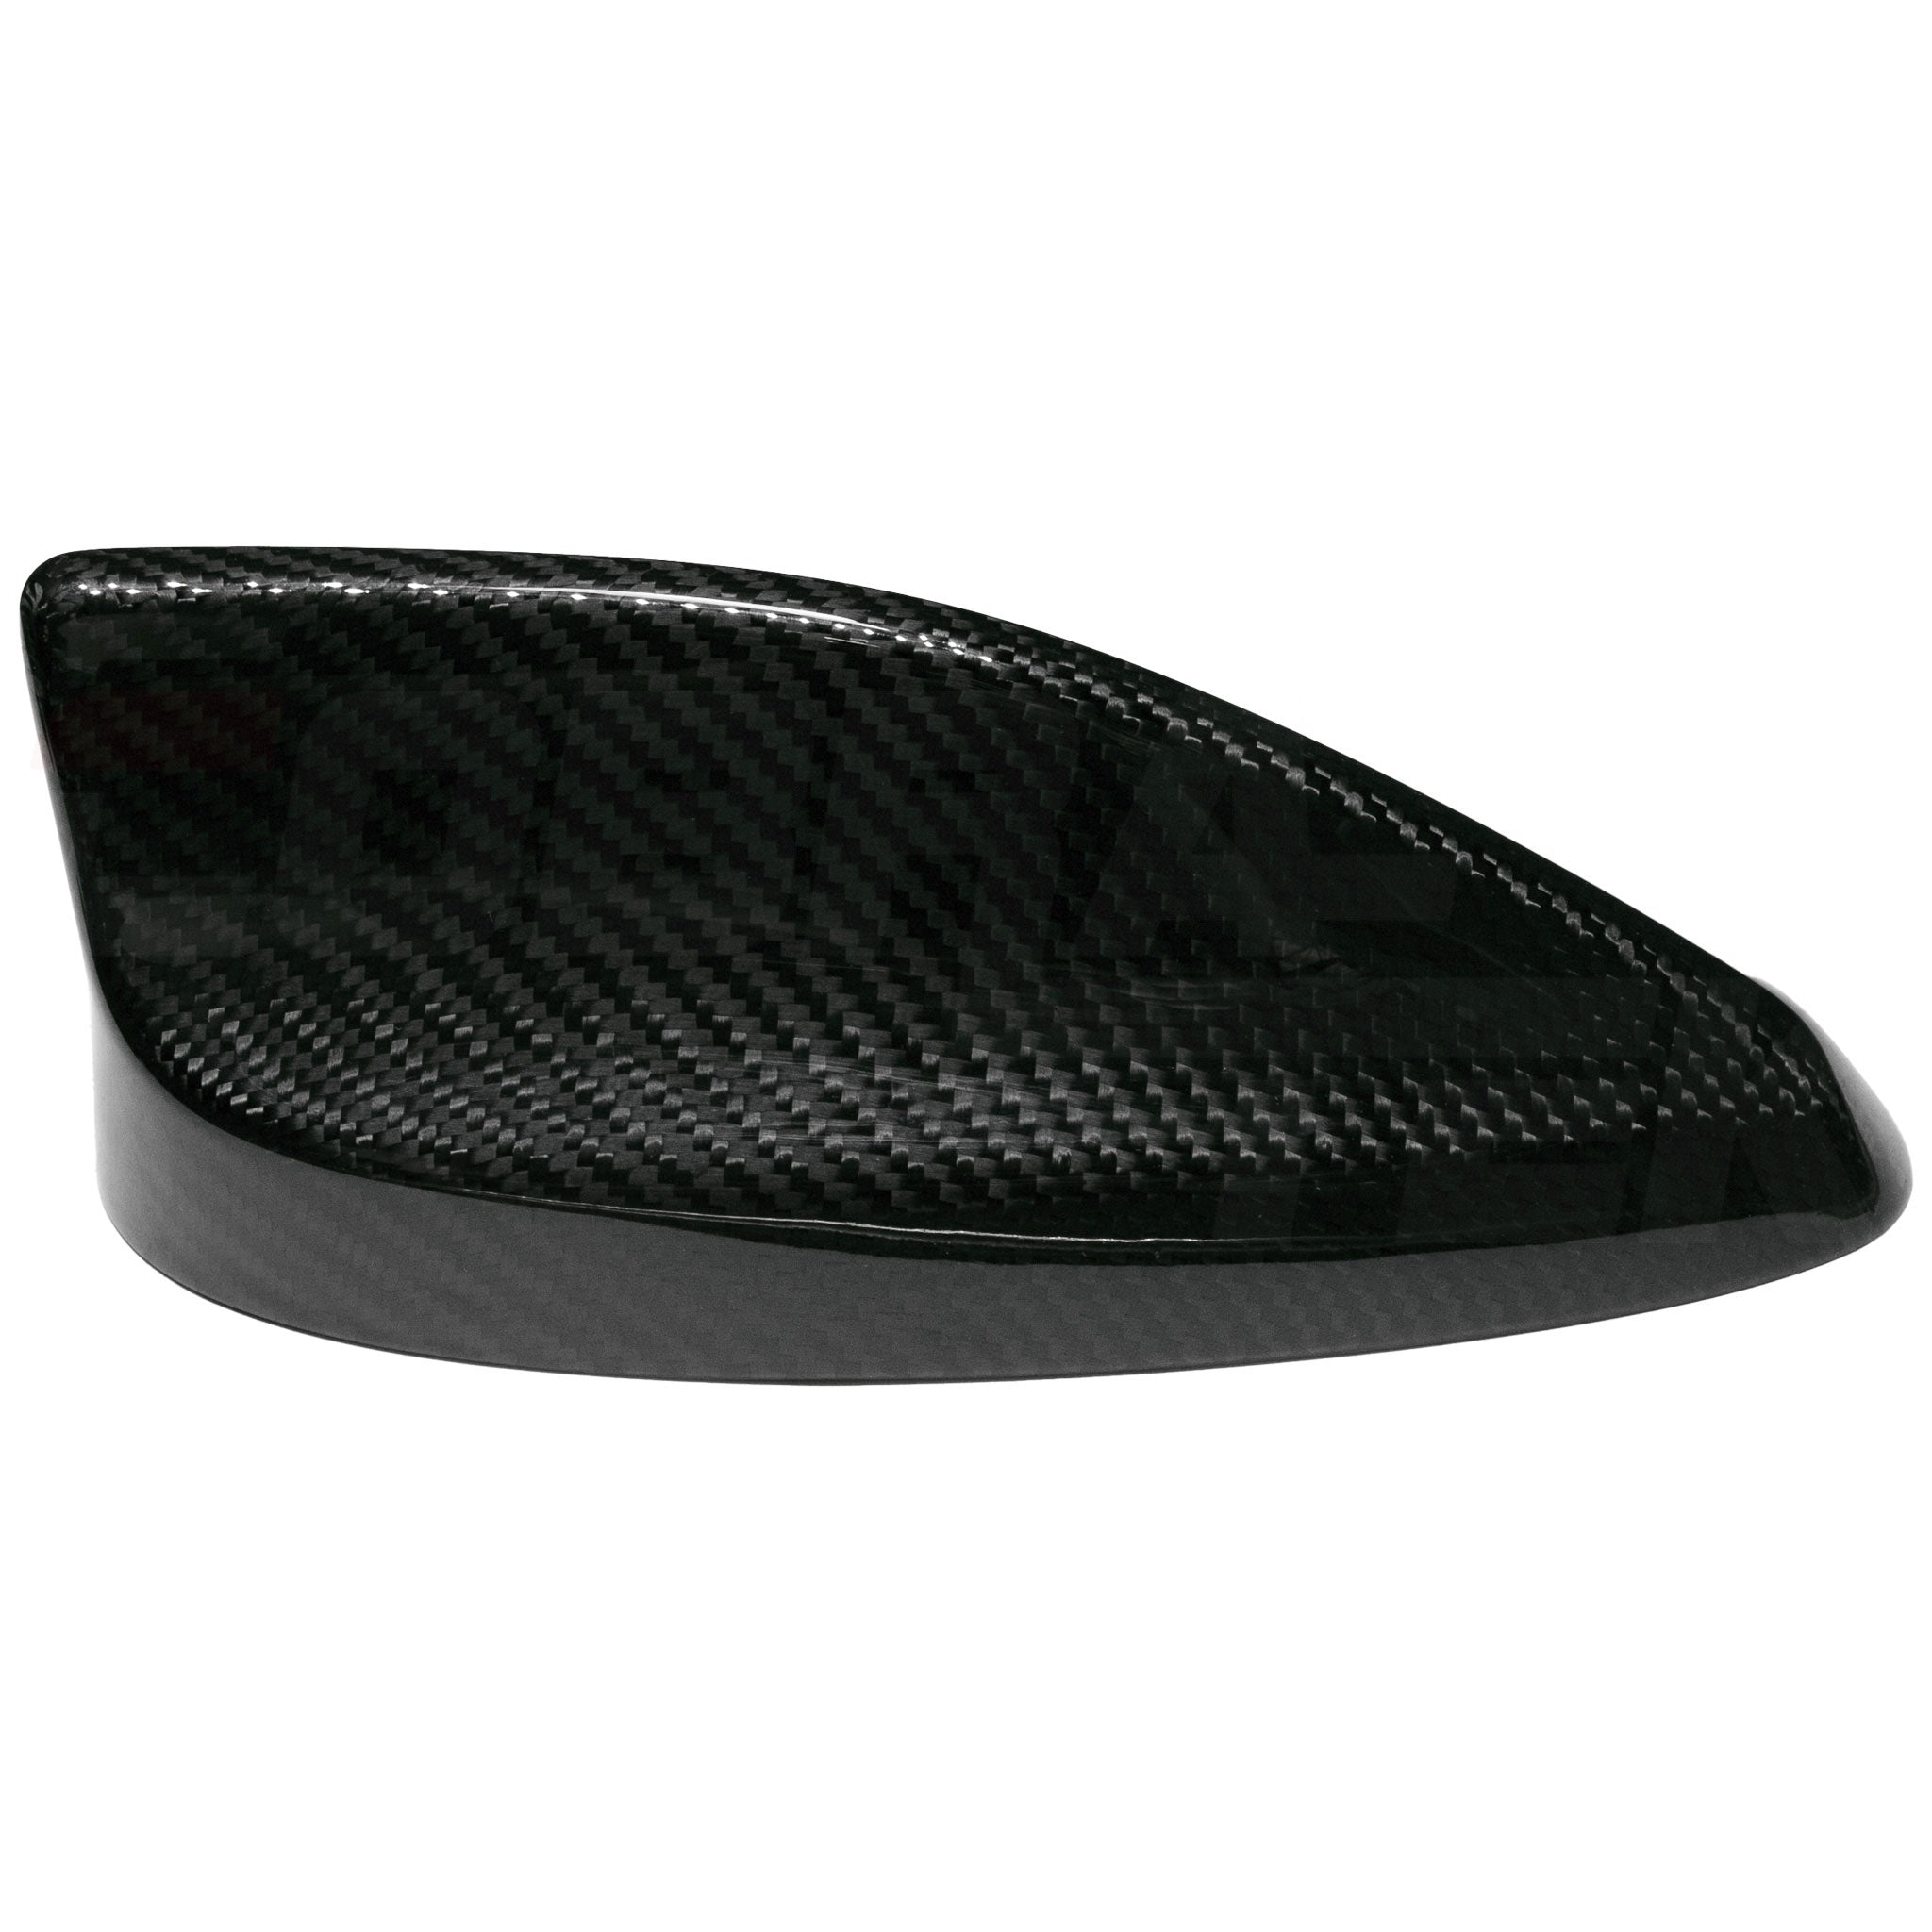 2021 - 2024 Ford Mustang Mach-E - Real Carbon Fiber Antenna Cover